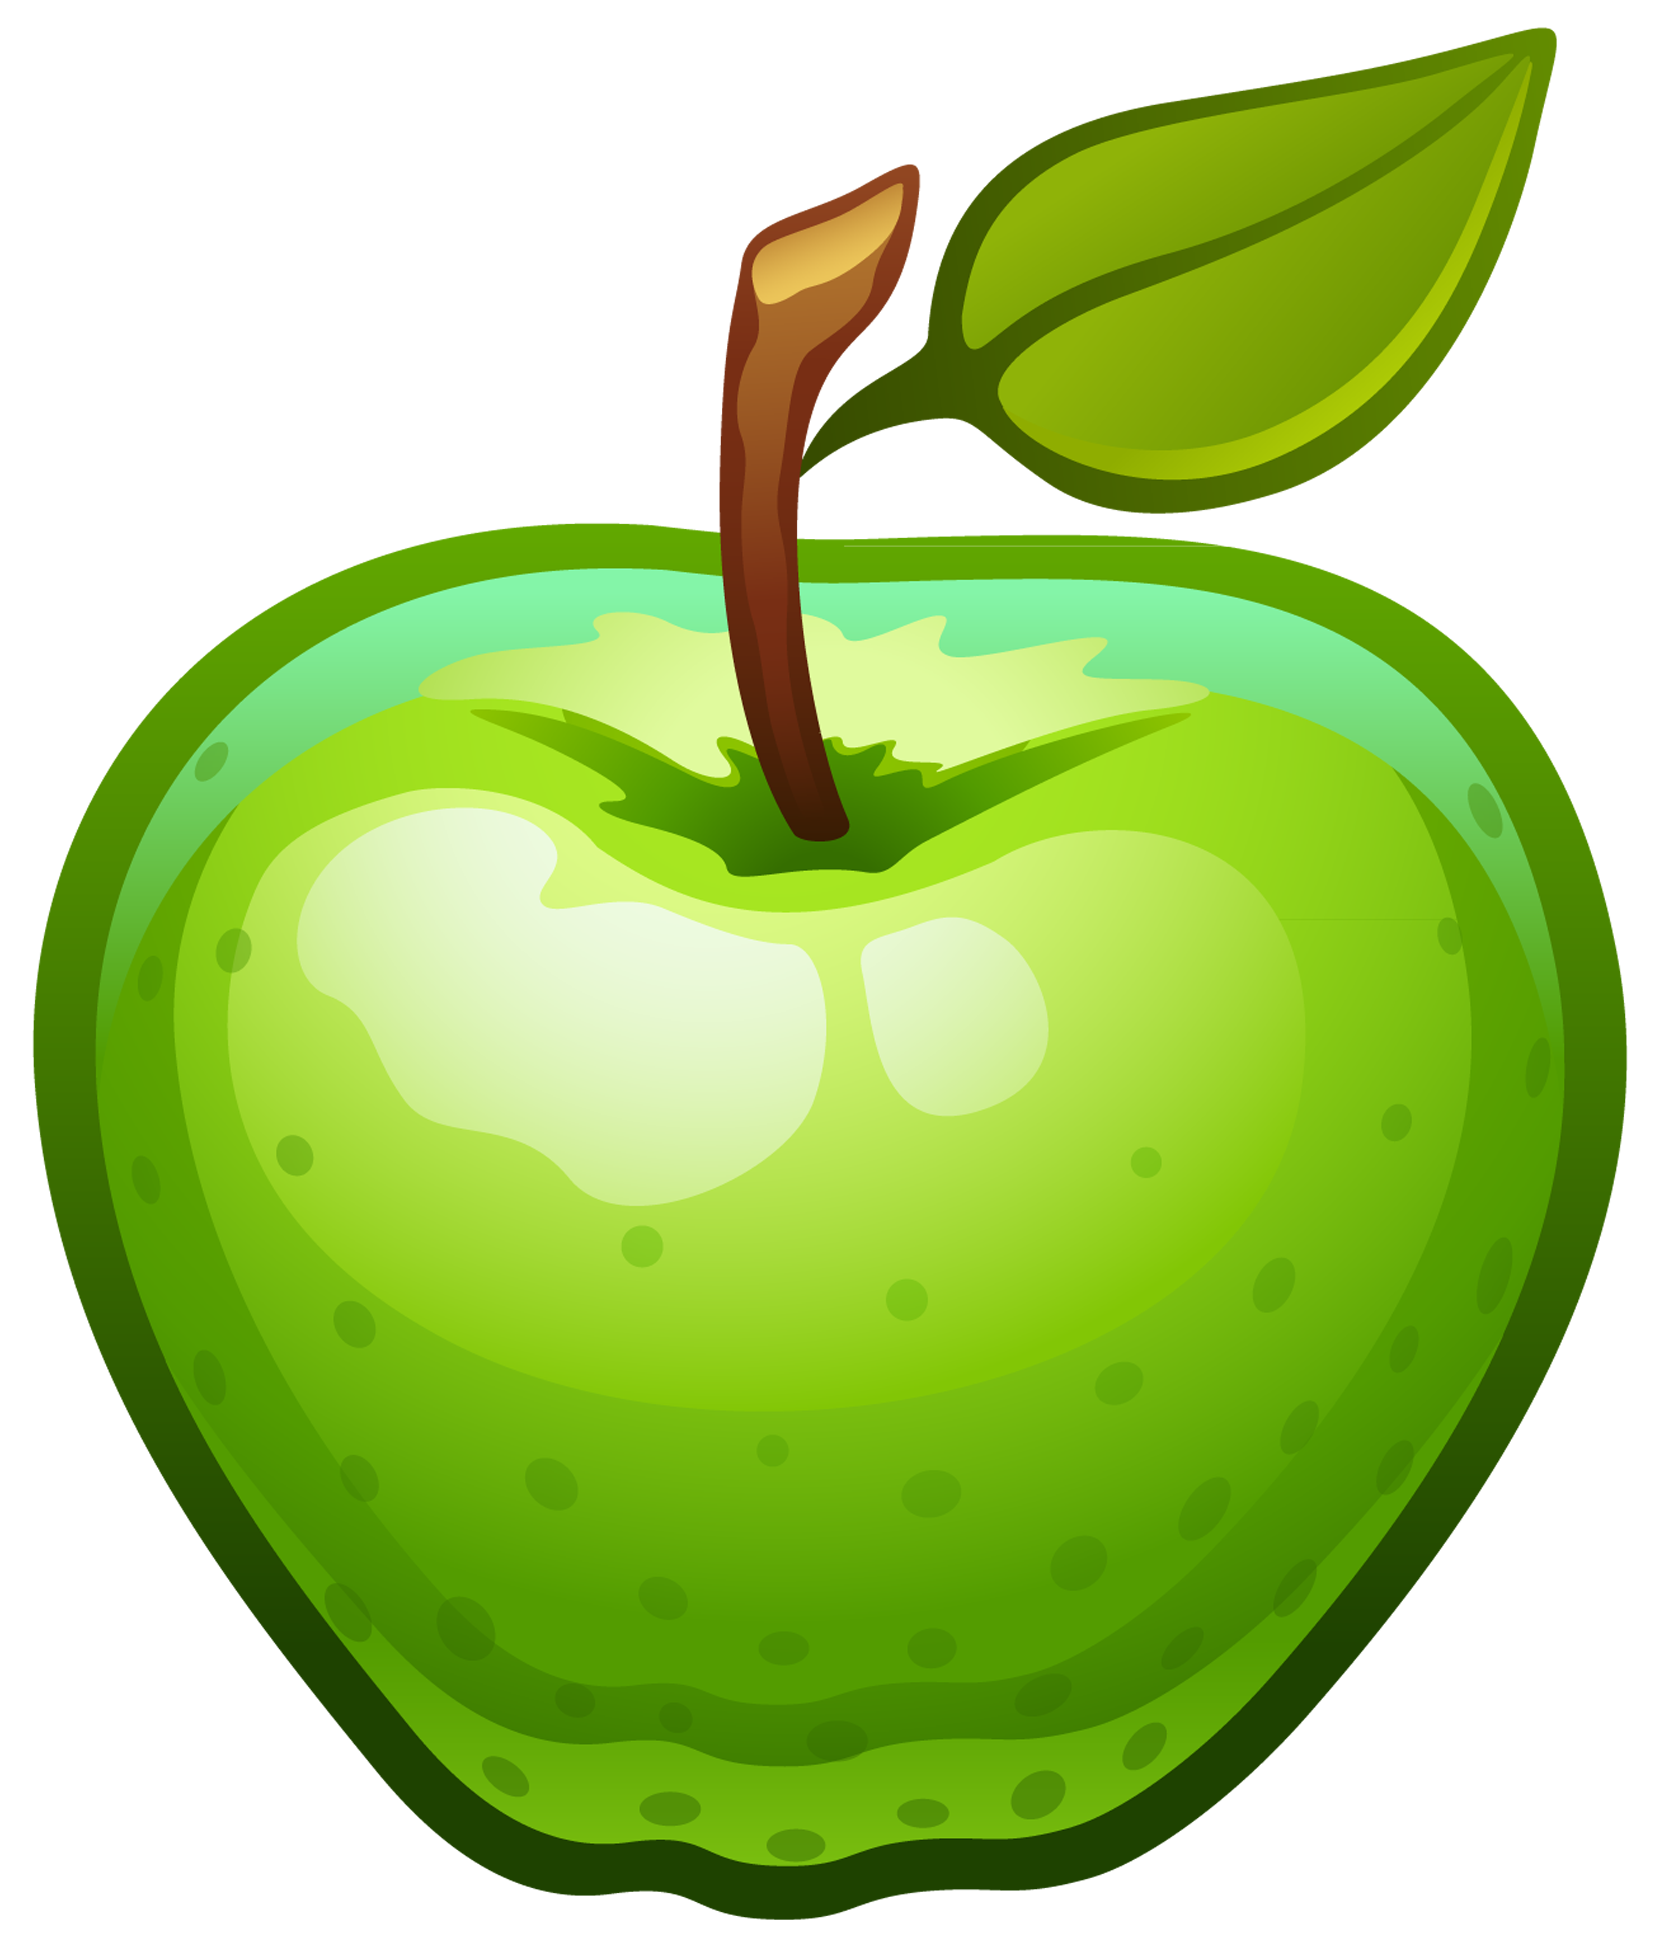 Green Apple Clipart | Clipart Panda - Free Clipart Images